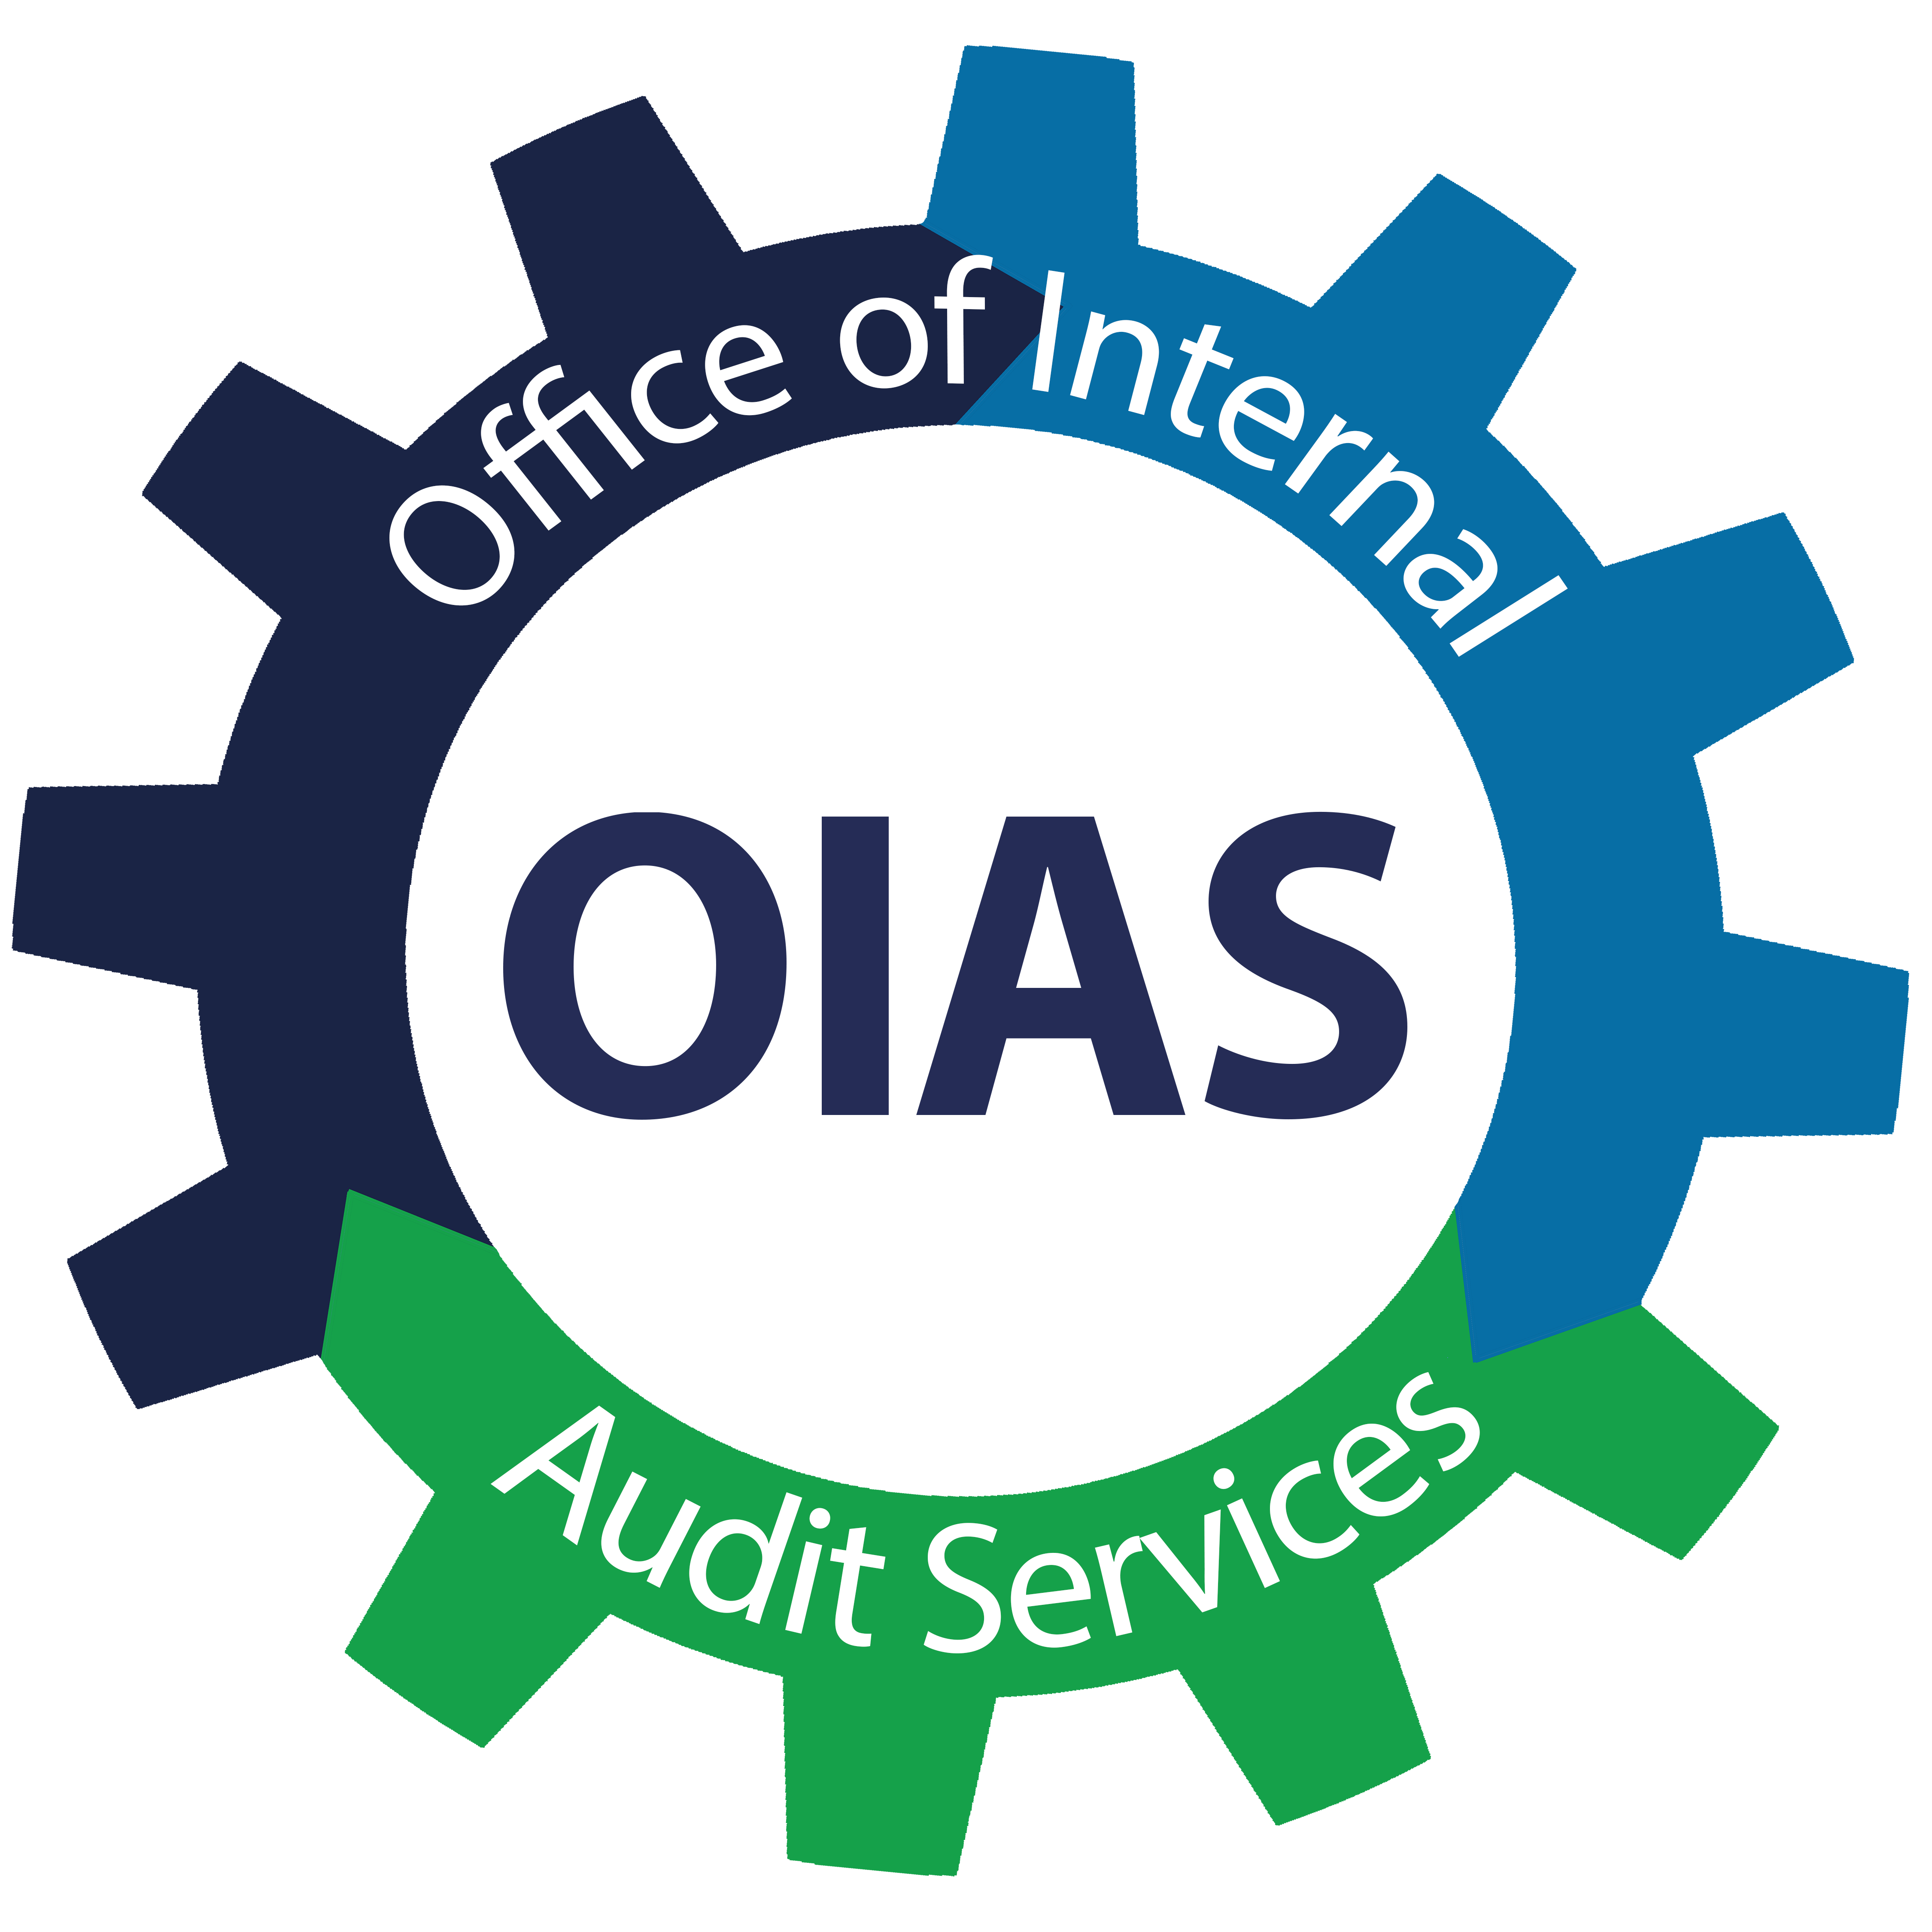 Auditing Logo - OPT - Office of Internal Audit Services